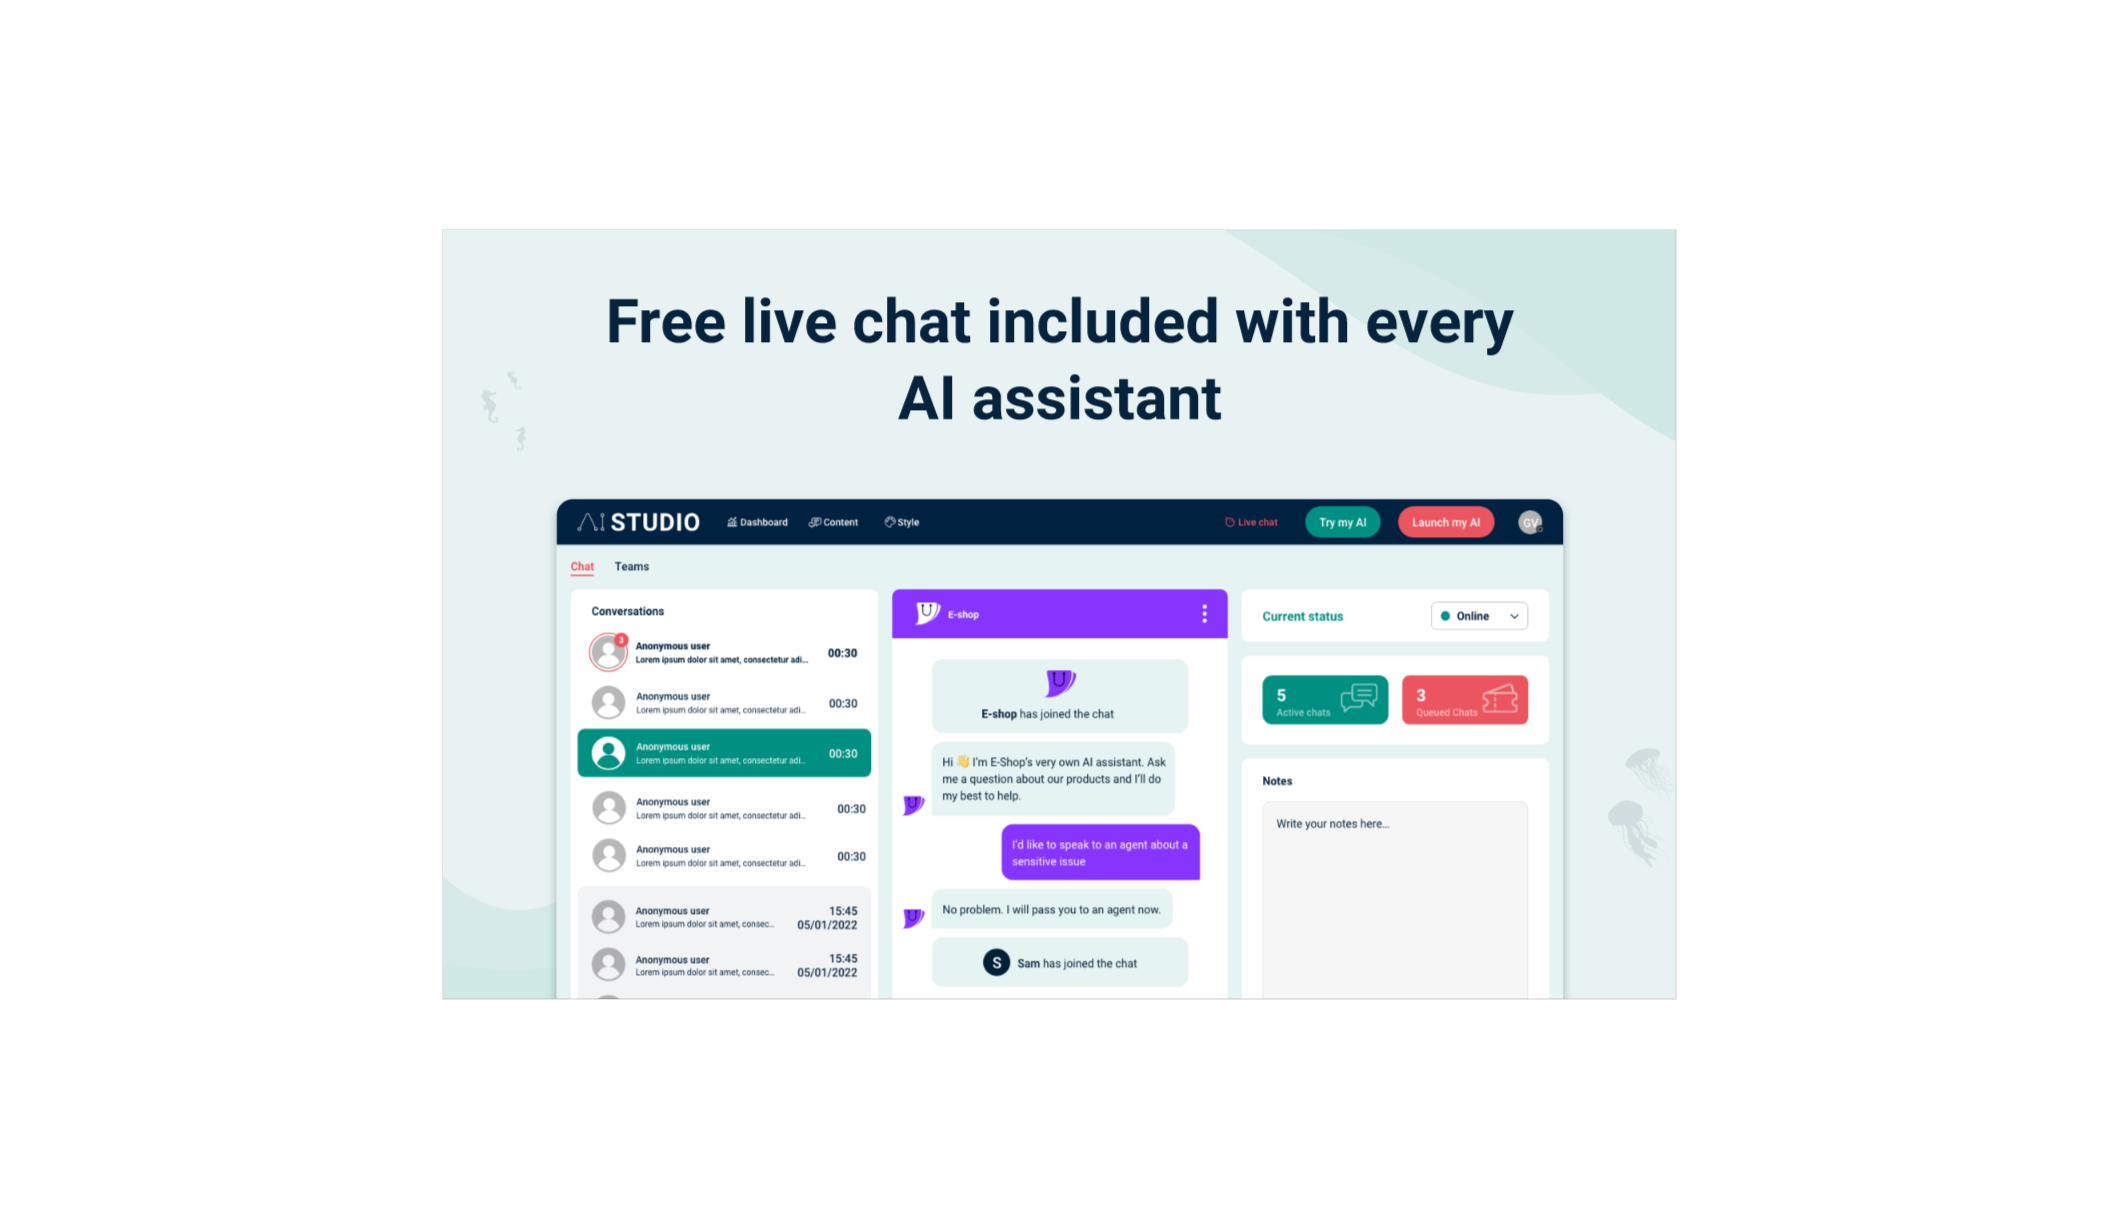 Free live chat